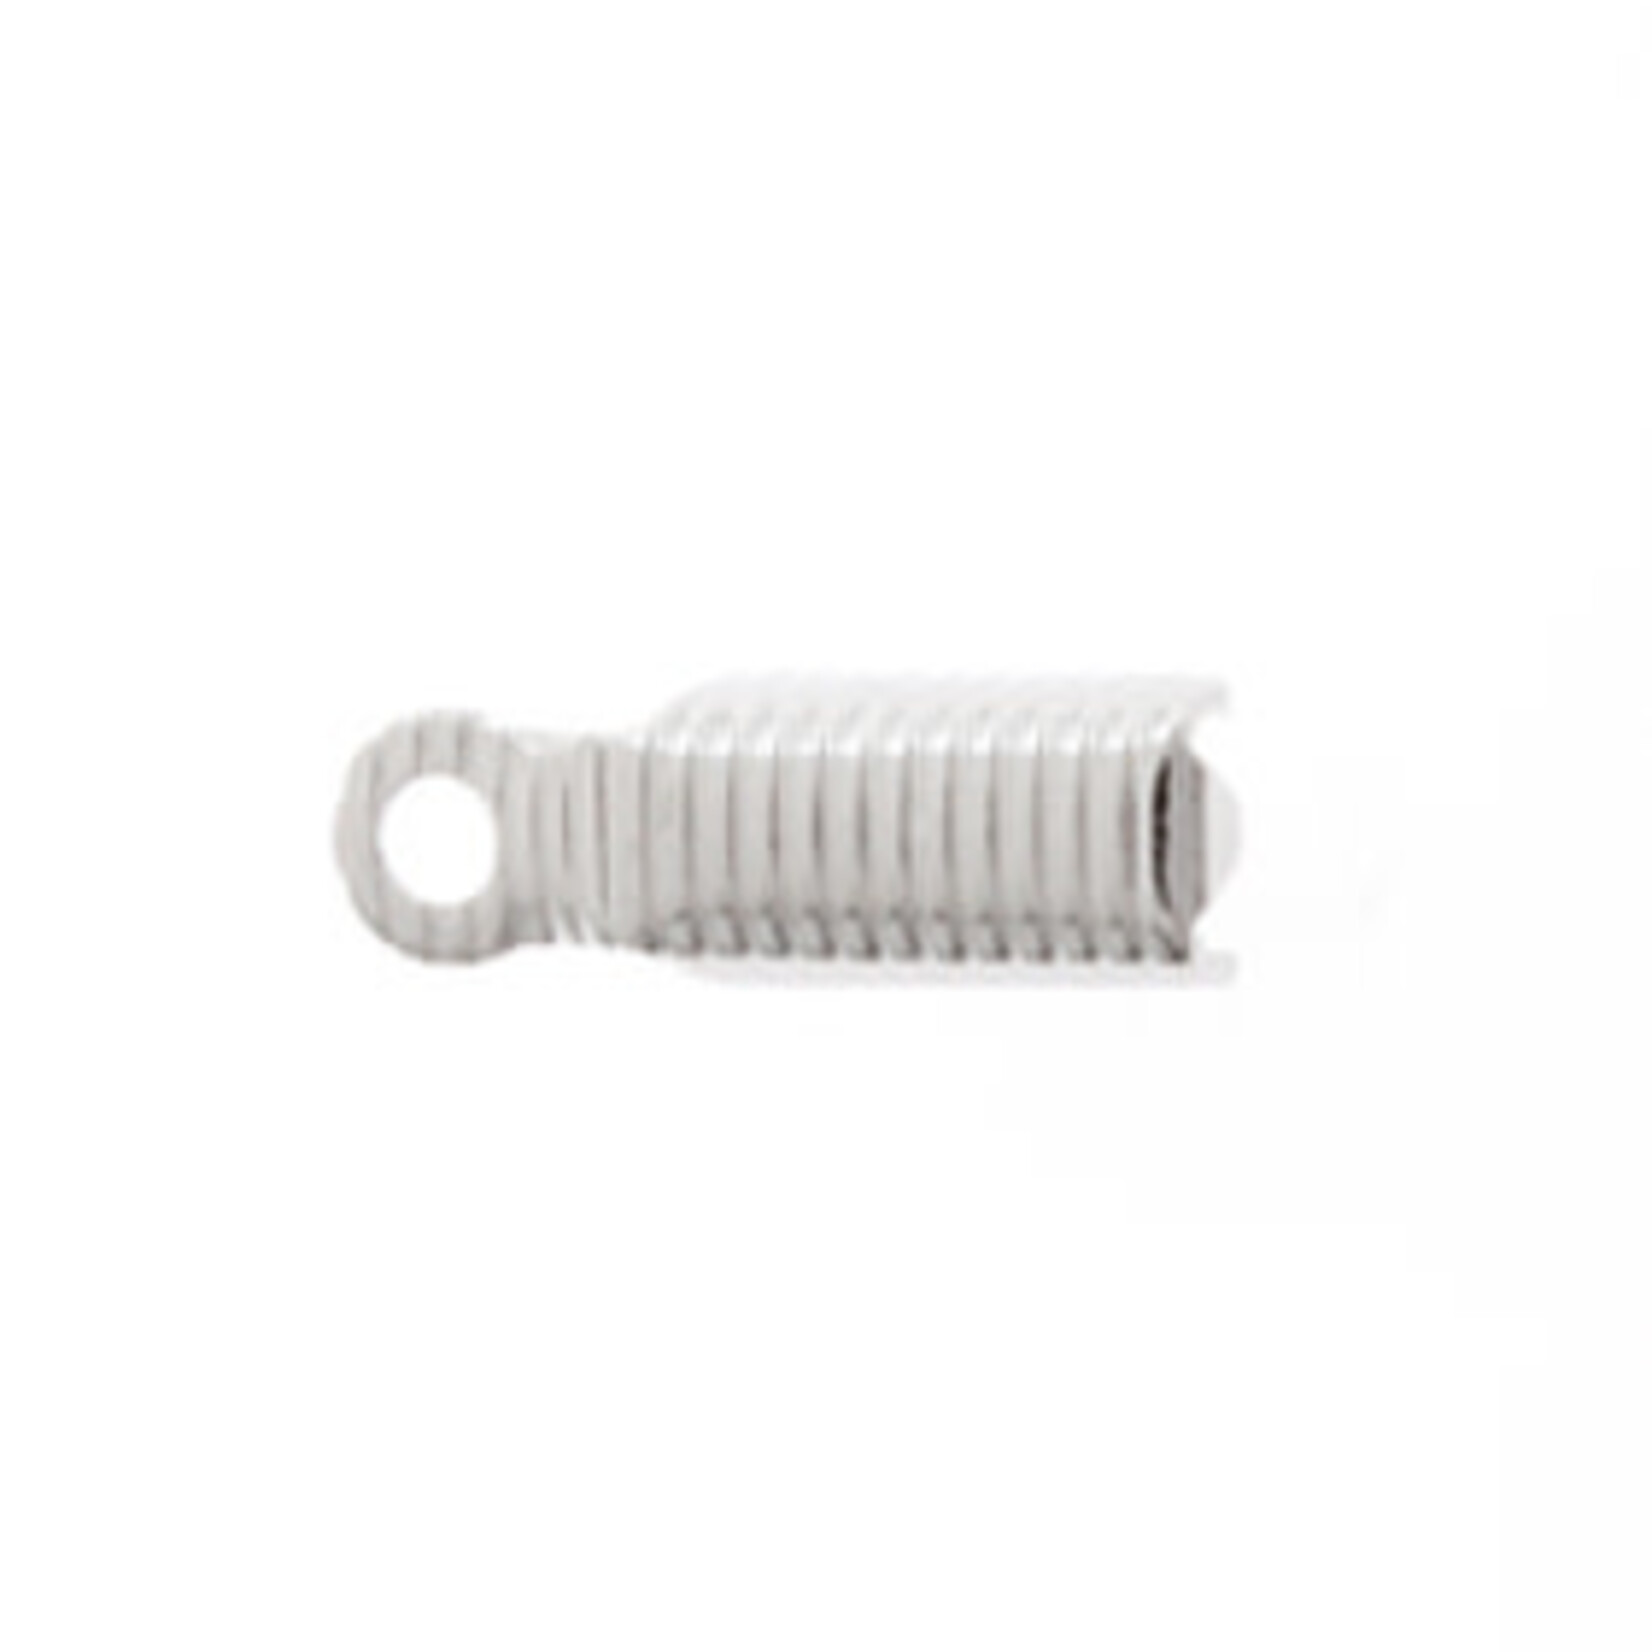 End Clamps (Leather Crimps) 3.5x11mm Coiled Nickle (100pcs)